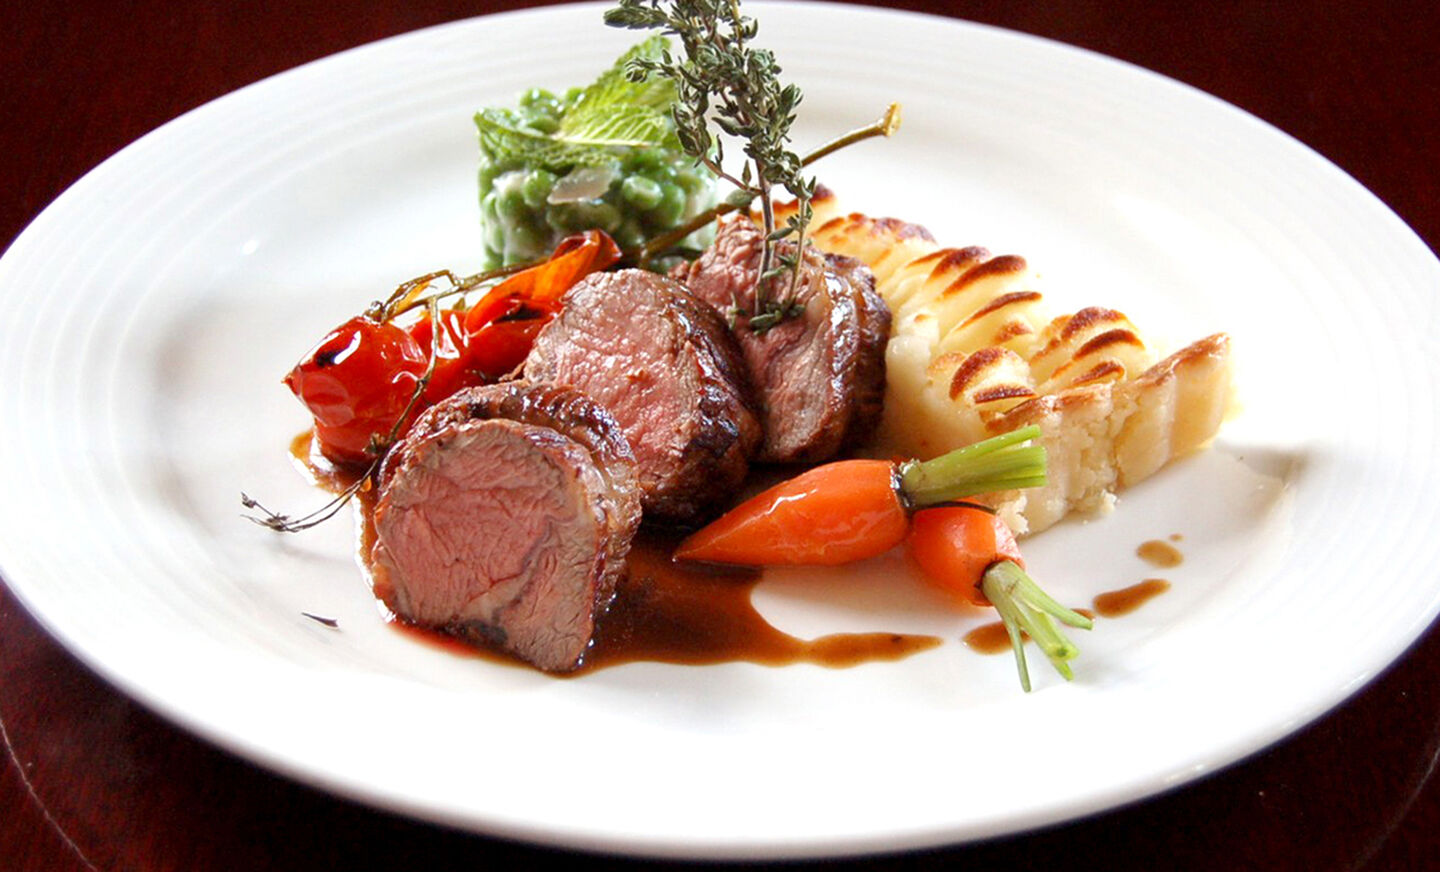 Cannon of Lamb with Red Wine Reduction Recipe | D'Artagnan